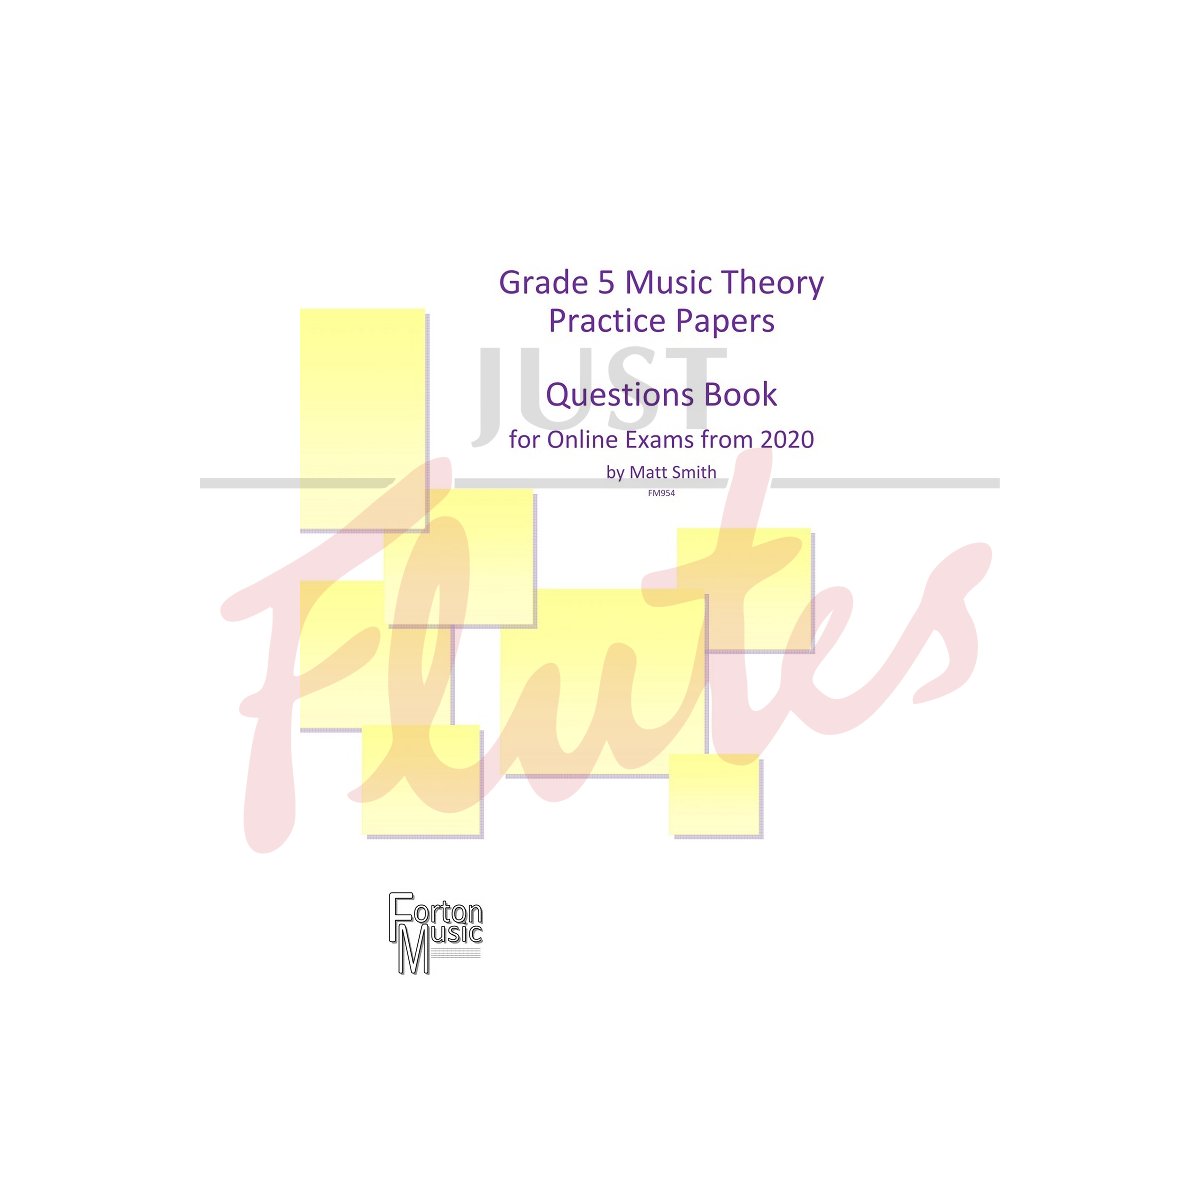 Grade 5 Music Theory Practice Papers Questions Book